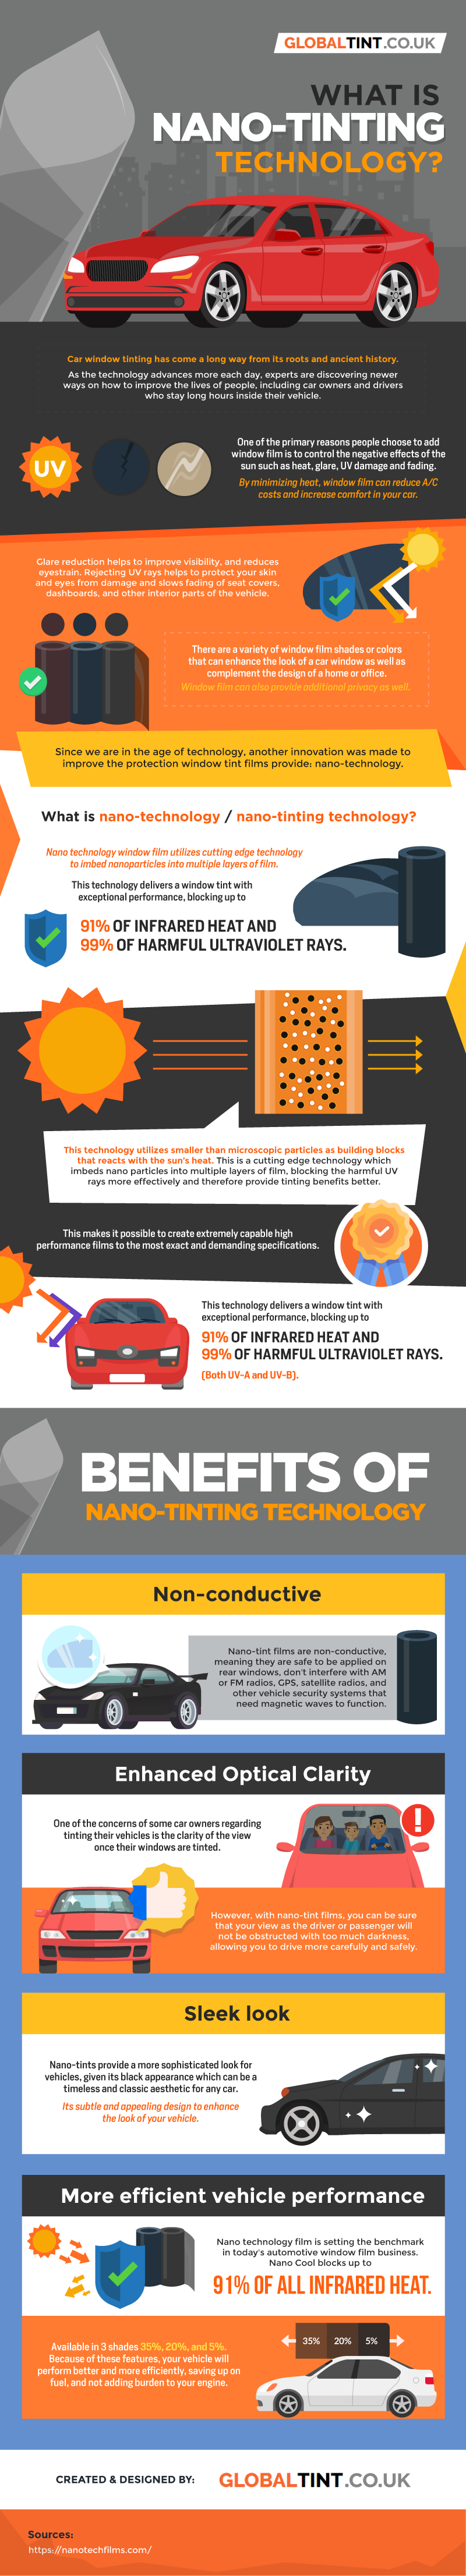 What is Nano-Tinting Technology?